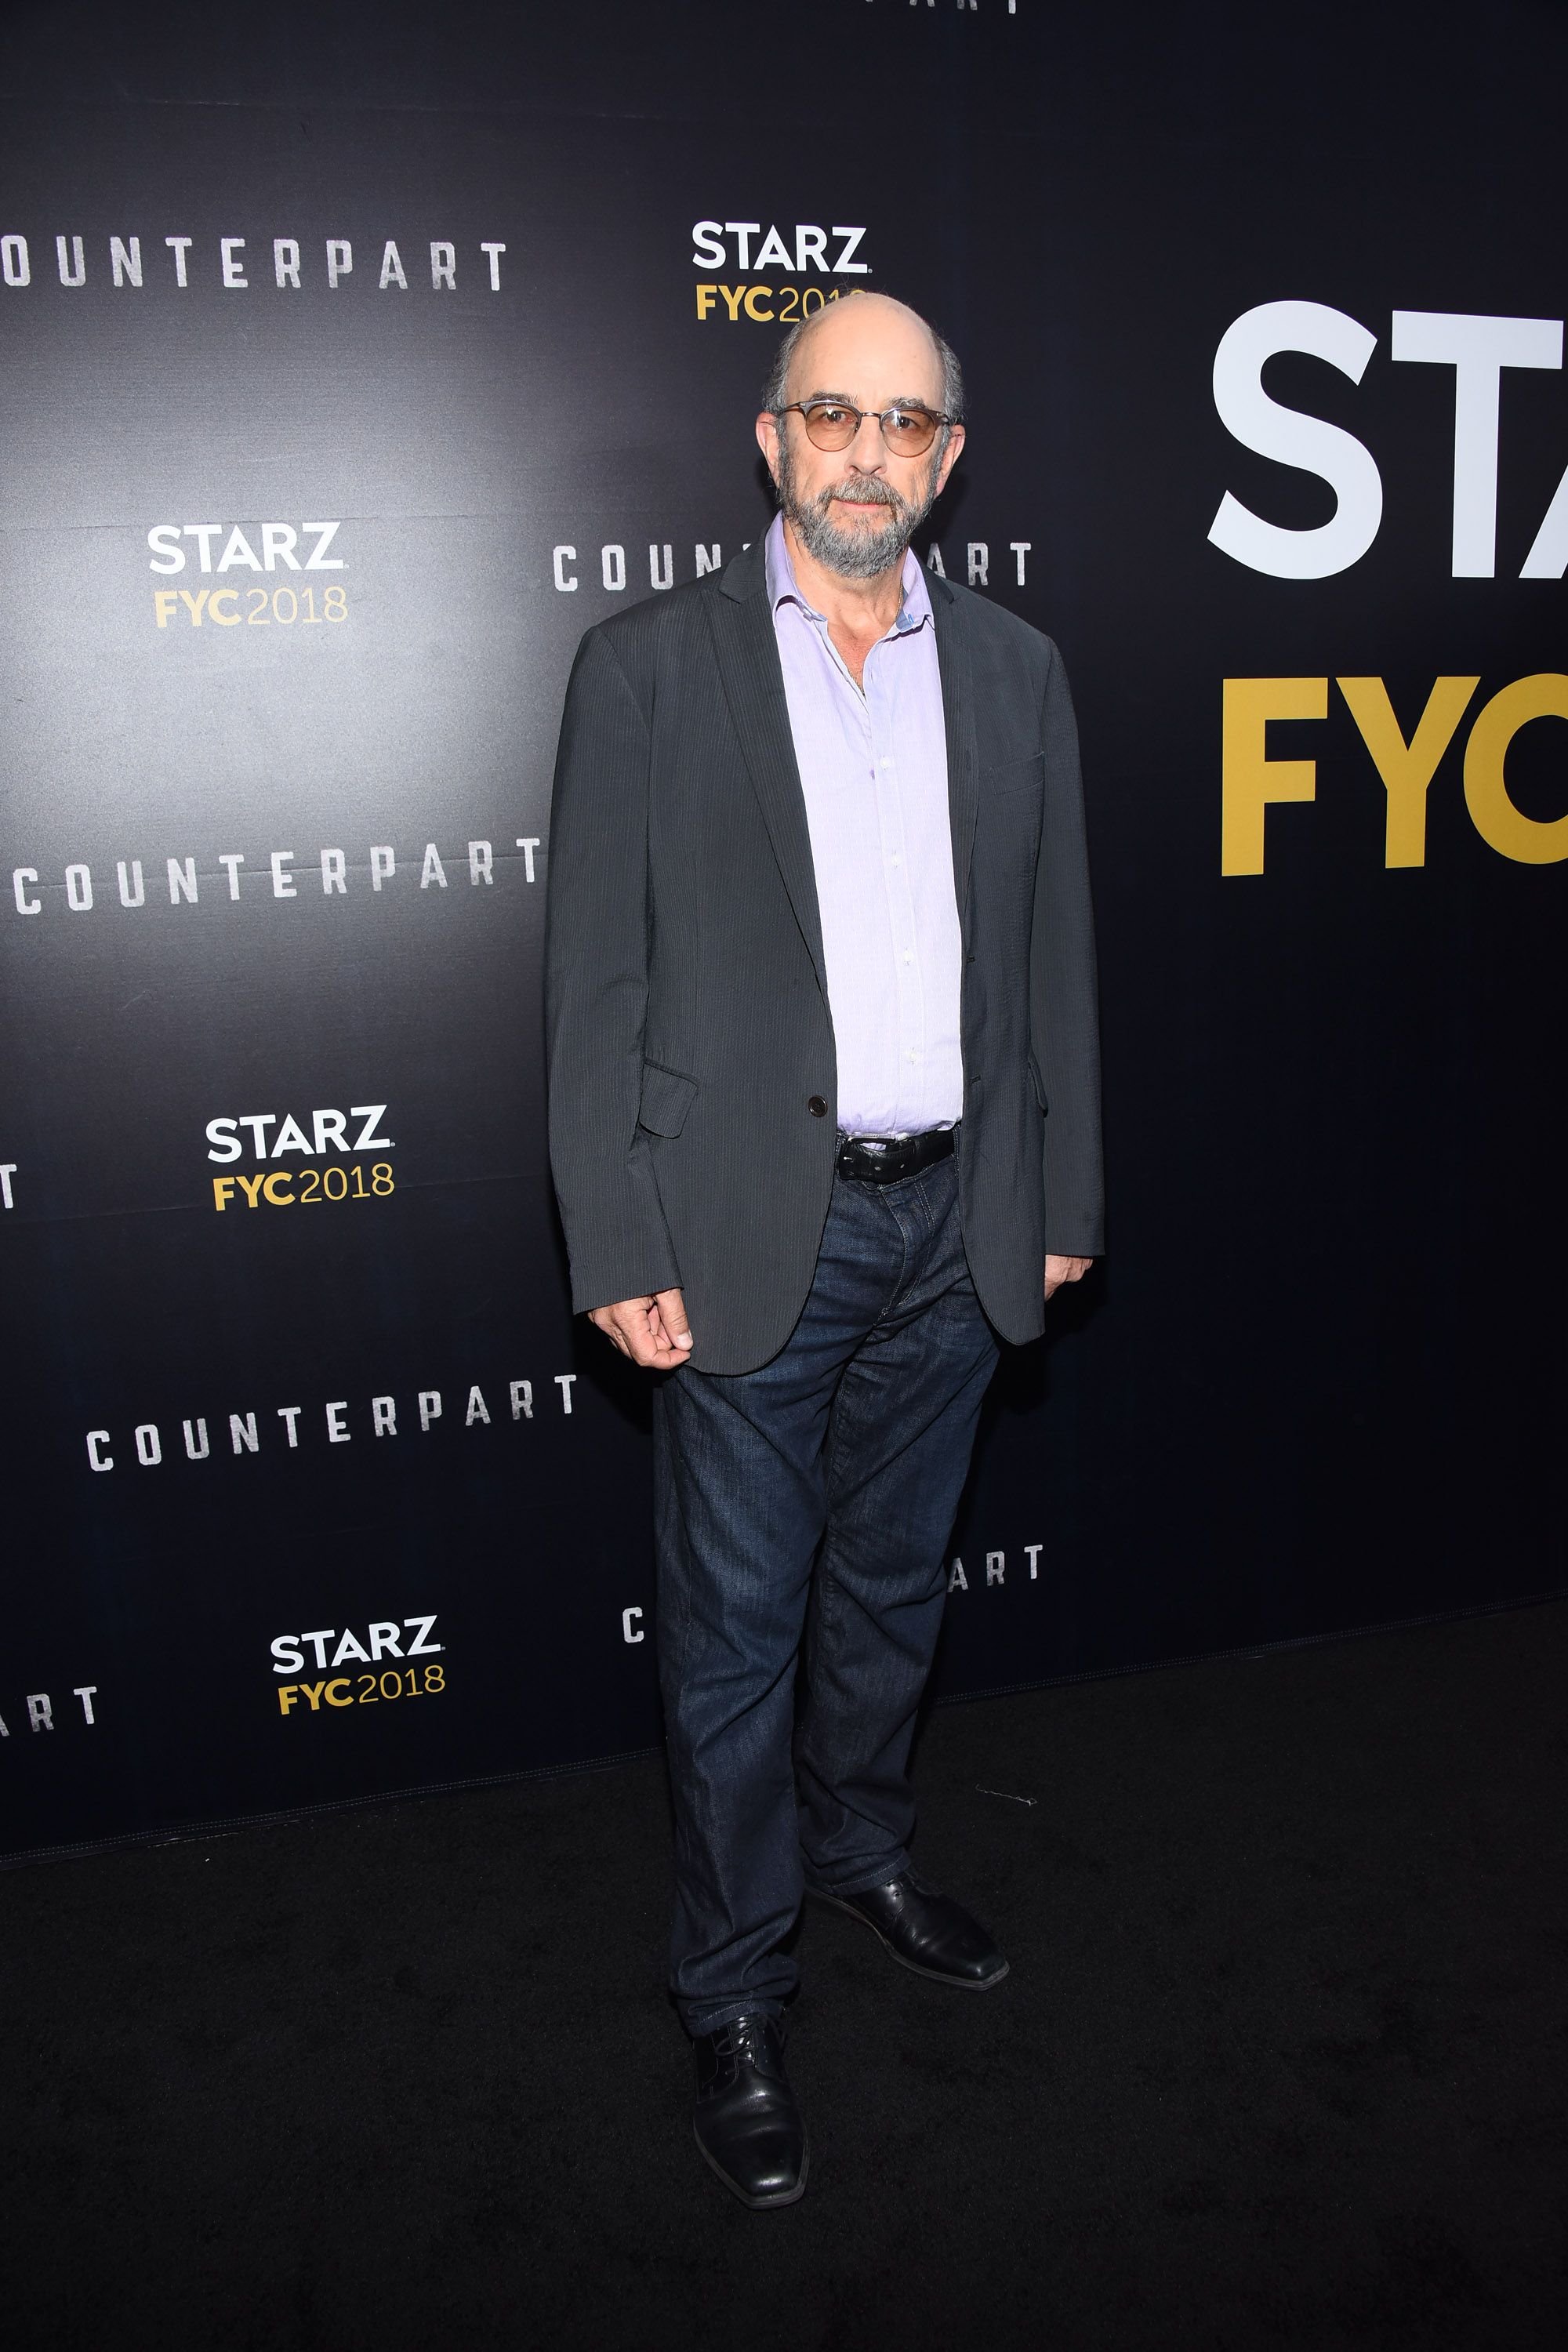 Richard Schiff at the For Your Consideration Event for Starz's "Counterpart" and "Howards End" on May 23, 2018, in Los Angeles, California | Photo: Araya Diaz/WireImage/Getty Images